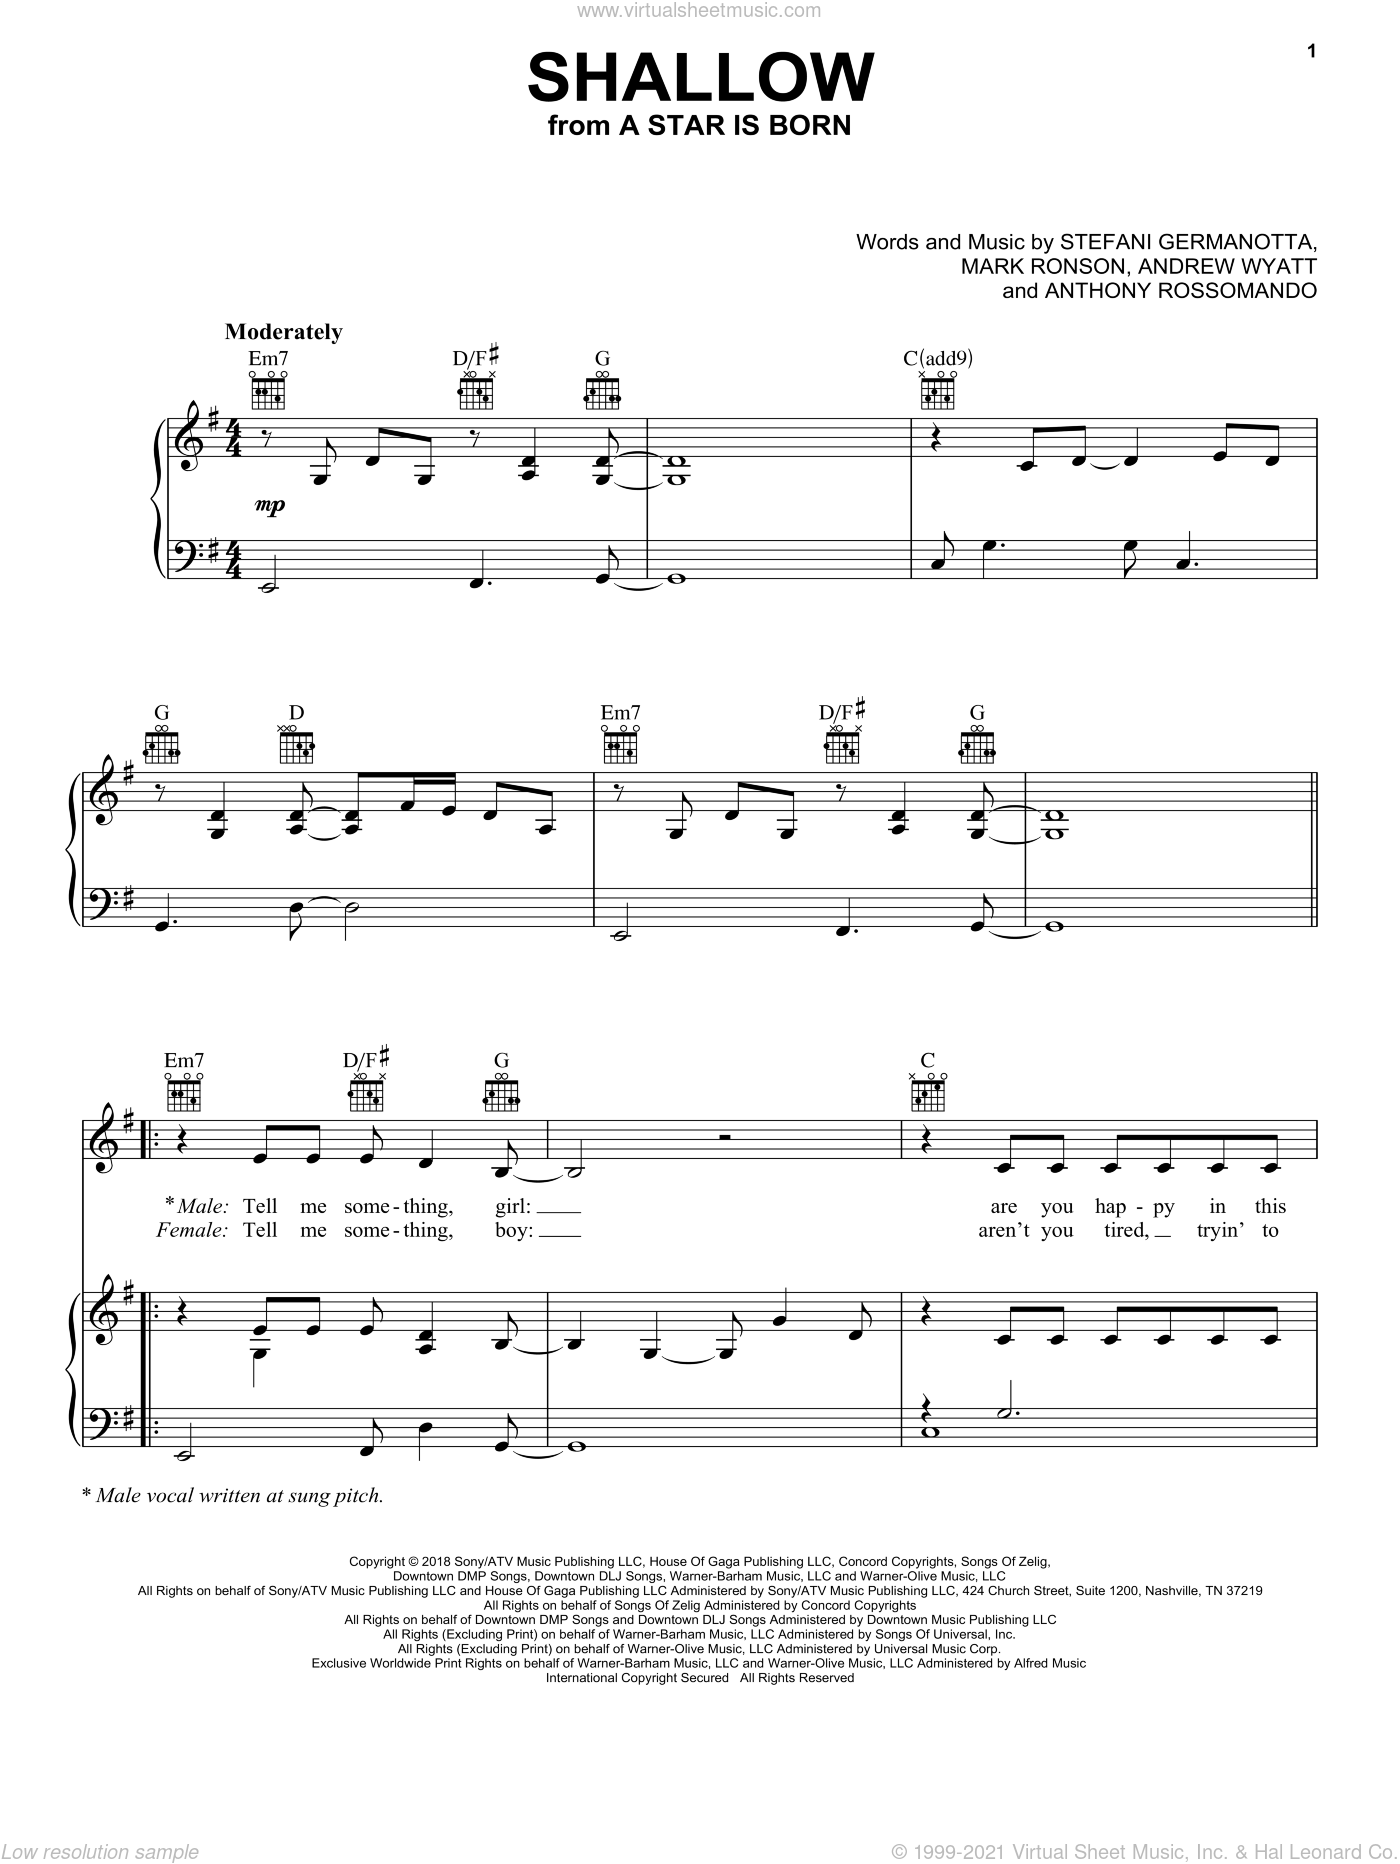 Shallow (from Star Is Born) sheet music for voice, piano guitar